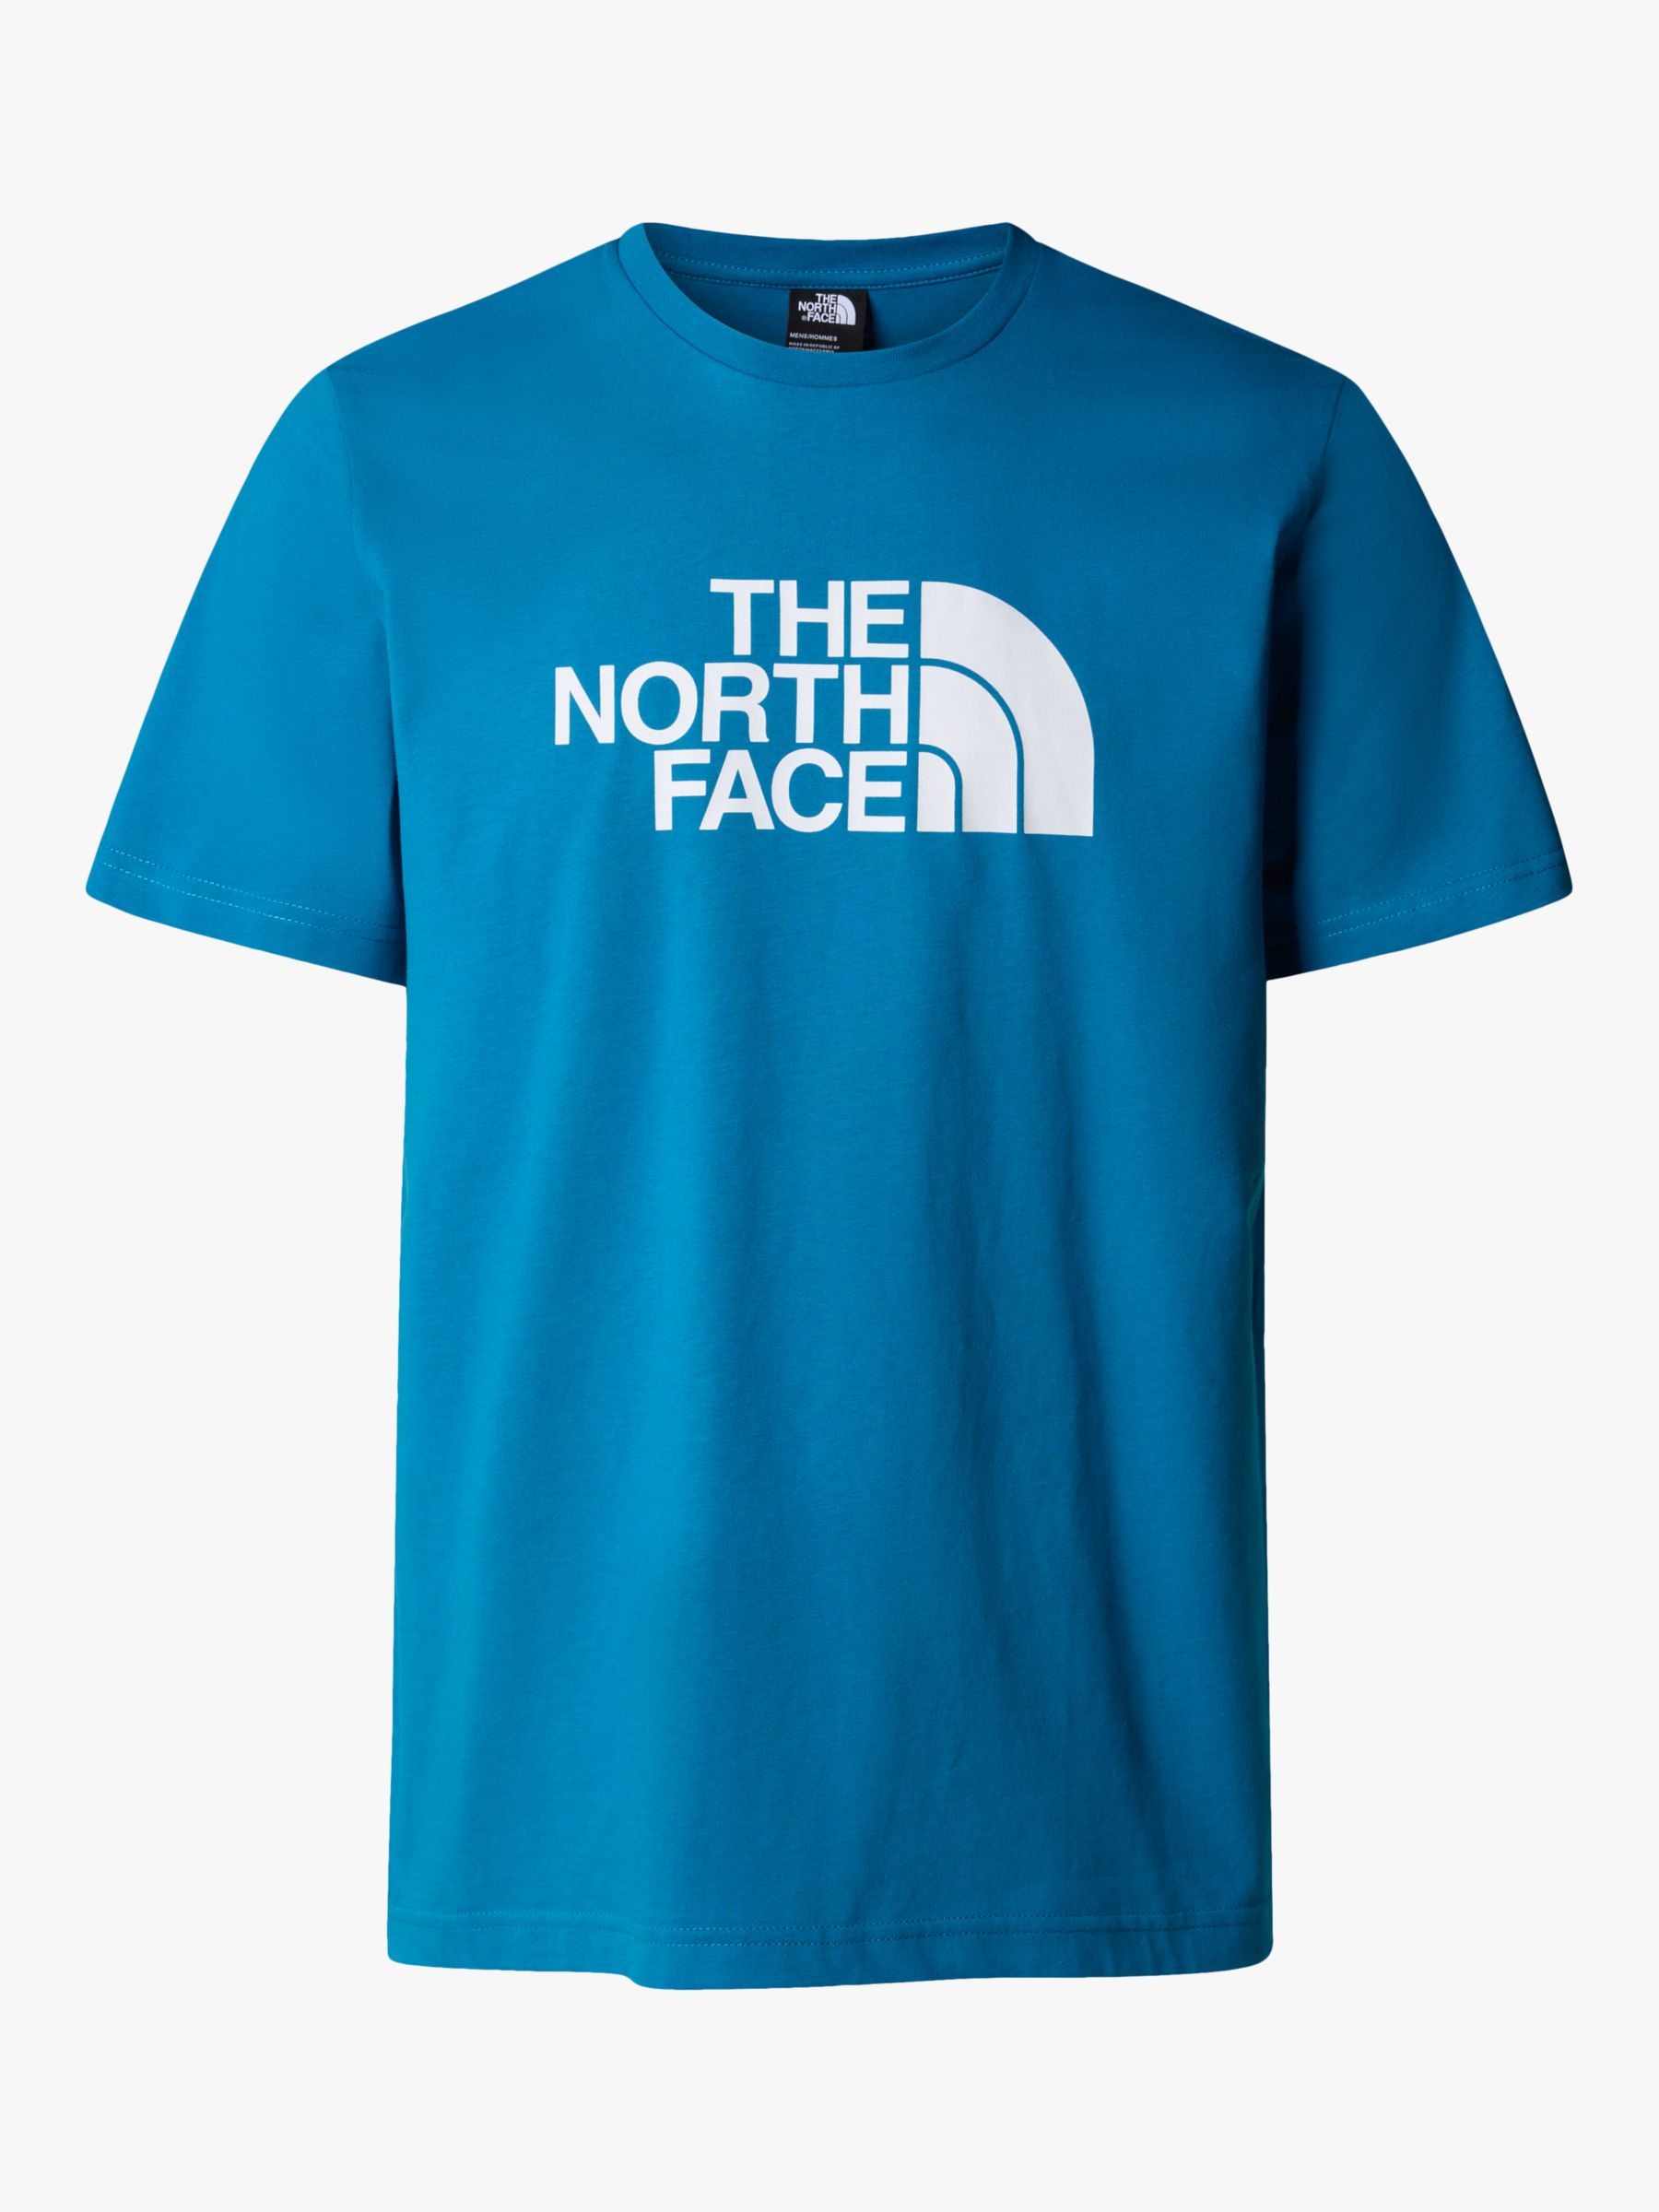 The North Face Easy Short Sleeve T-Shirt, Adriatic Blue, XL